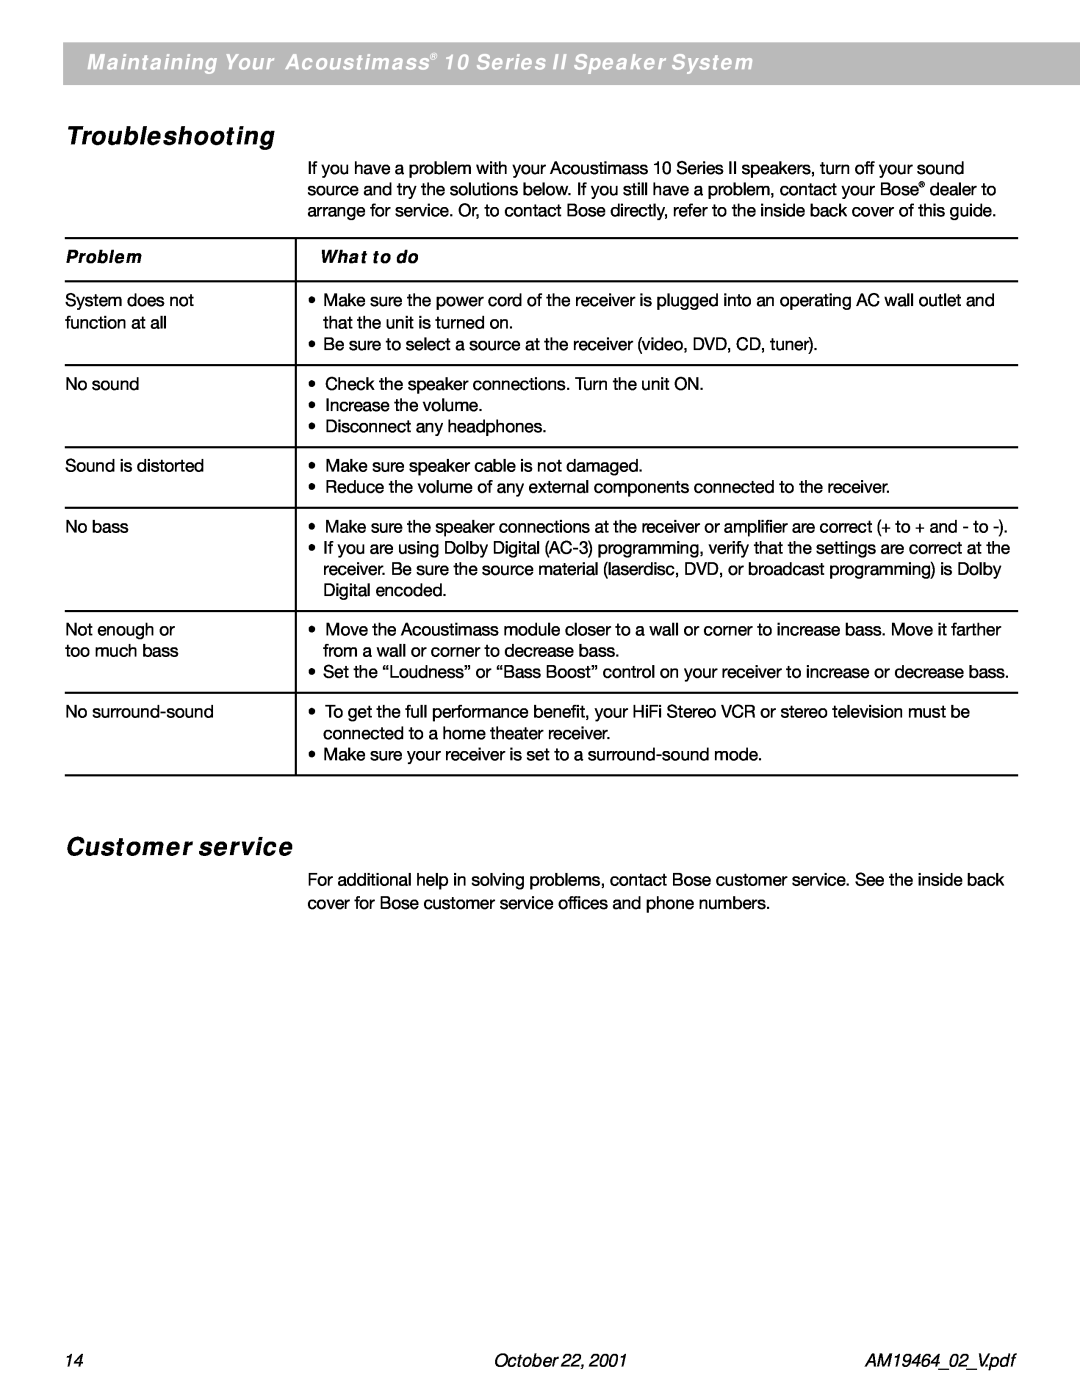 Bose 10 Series II manual Troubleshooting, Customer service, Problem, What to do, October 